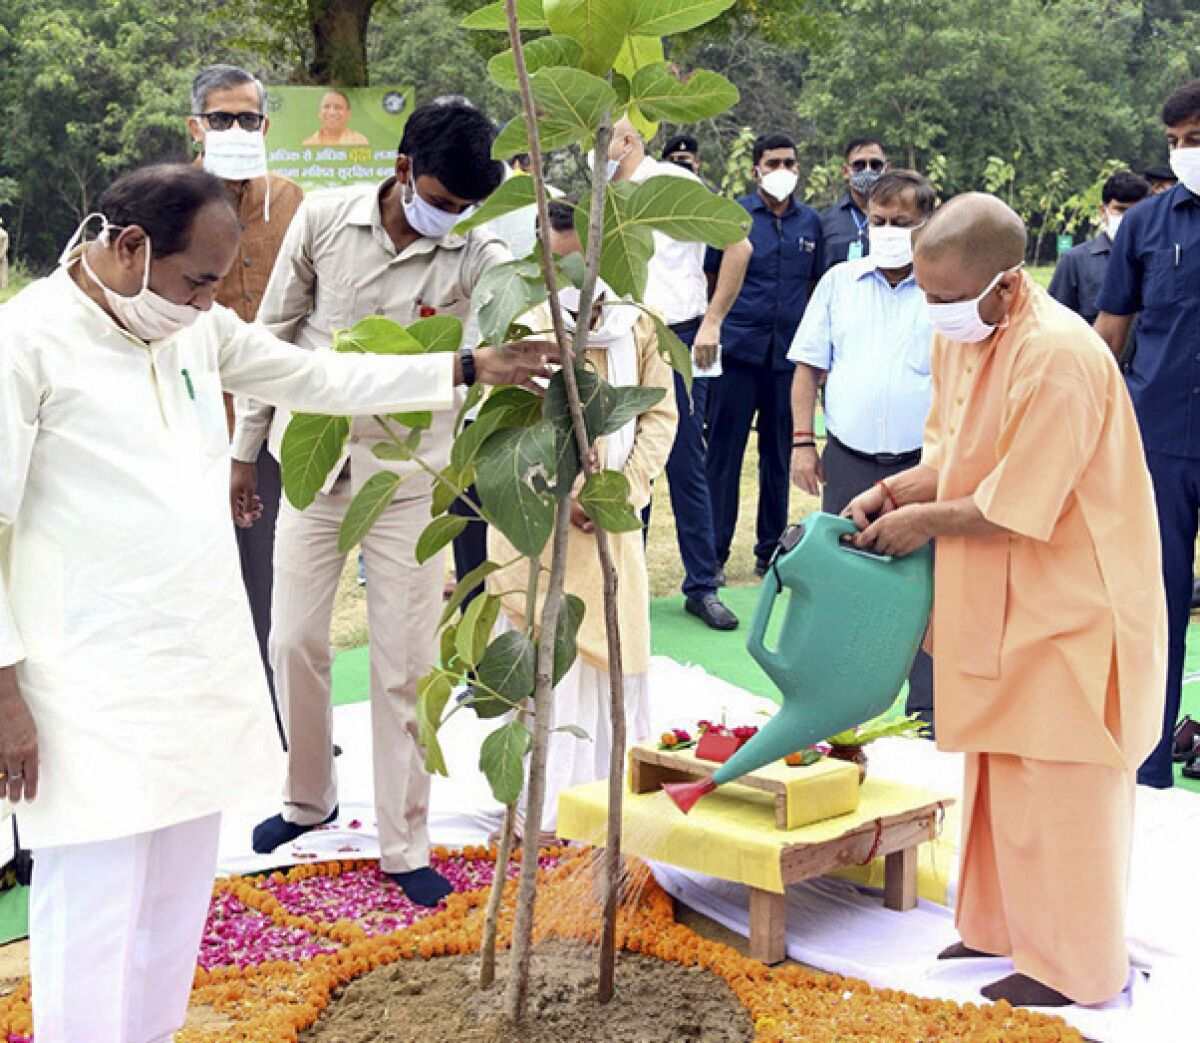 In this photo released by India's Uttar Pradesh state government, Uttar Pradesh Chief Minister, Yogi Adityanath, right, inaugurates a day long tree planting campaign across the state in Lucknow, India, Sunday, July 5, 2020. (Uttar Pradesh state government via AP)